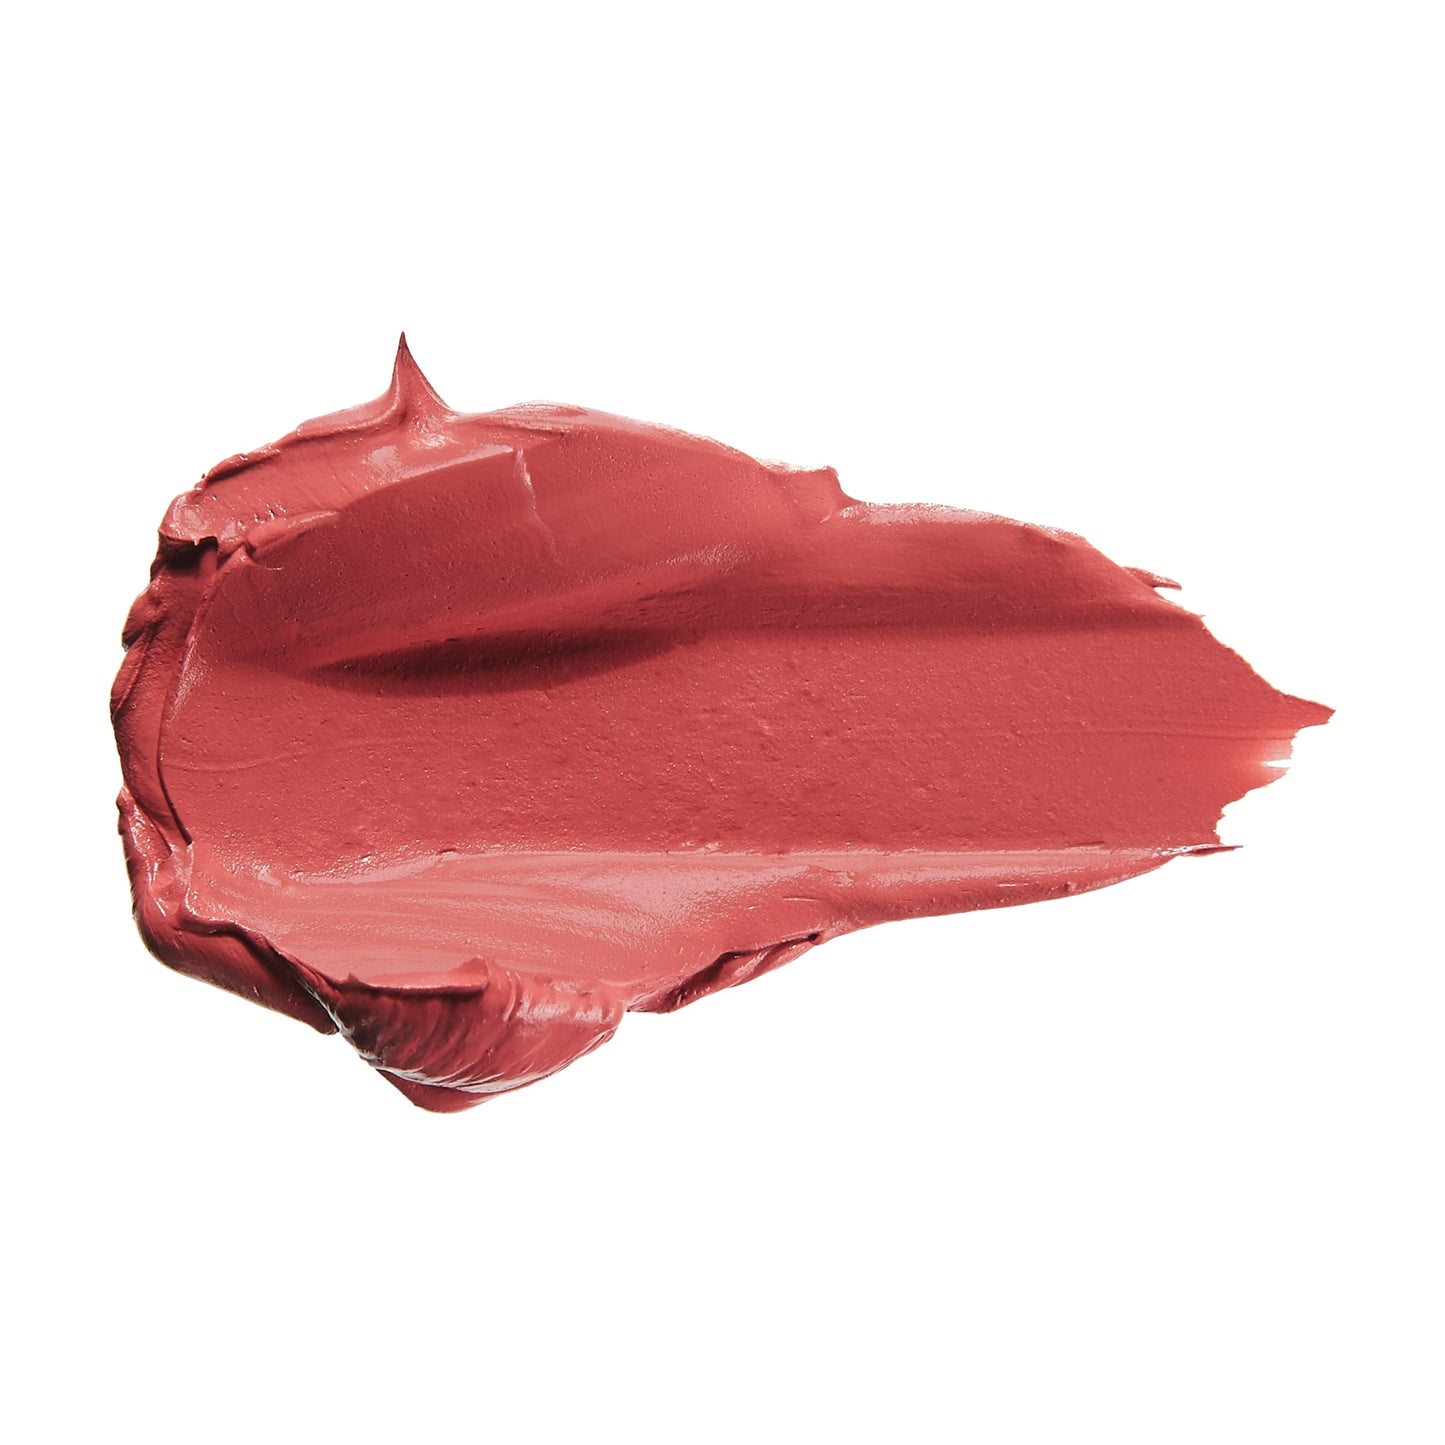 100% PURE Fruit Pigmented Cocoa Butter Matte Lipstick plume pink